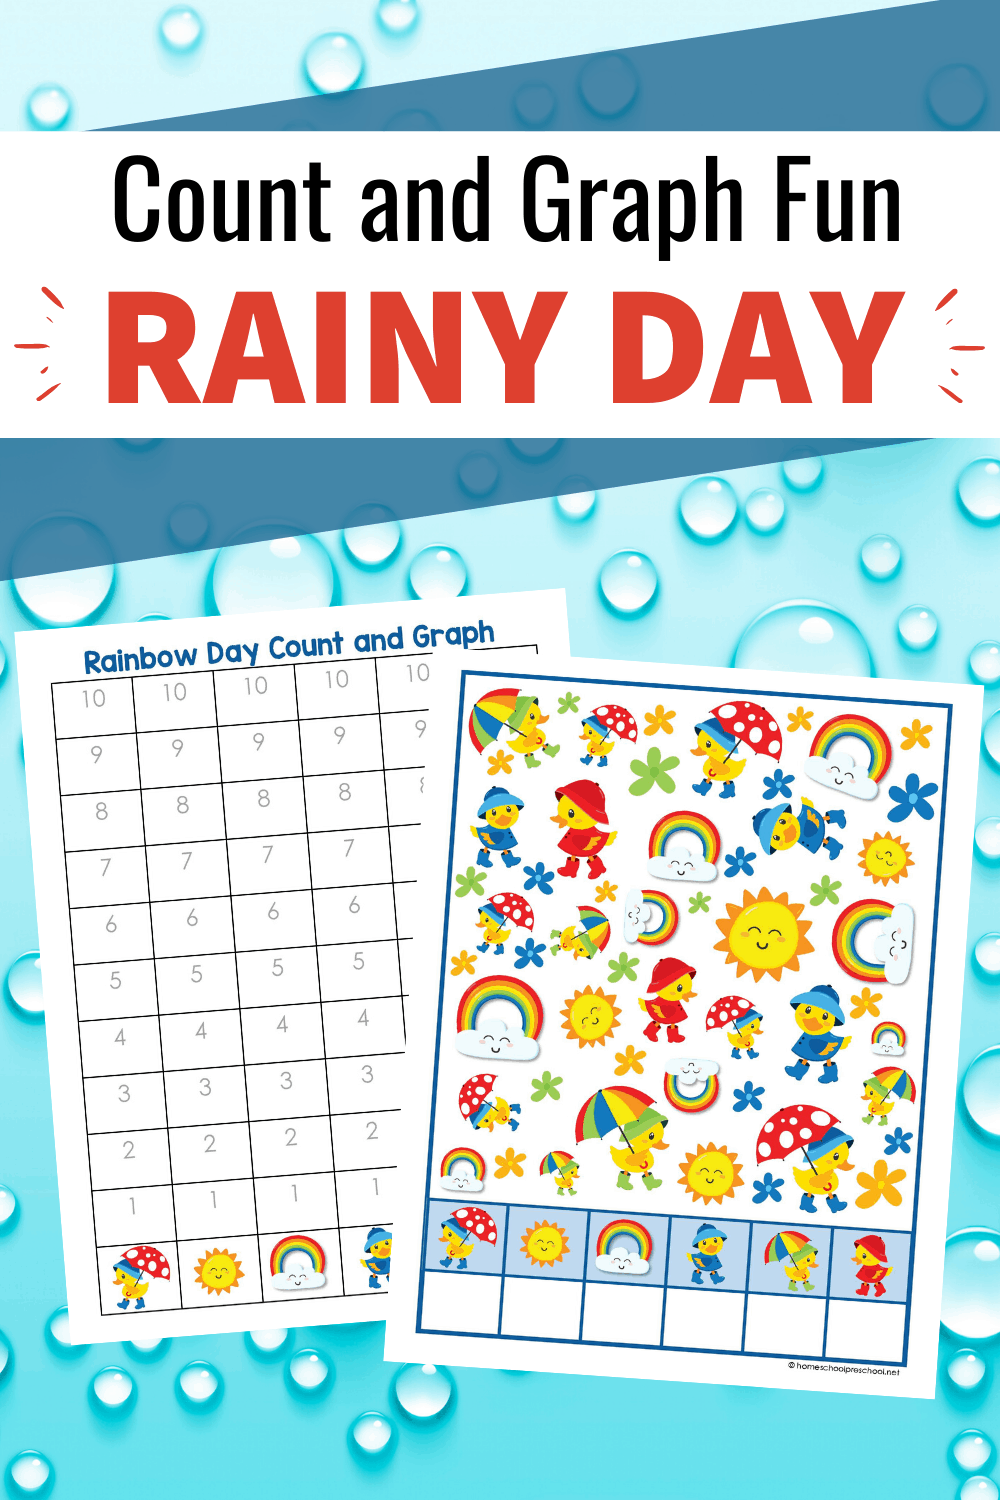 Be sure to add these fun rainy day count and graph worksheets to your preschool activities! They're perfect for spring and summer days.